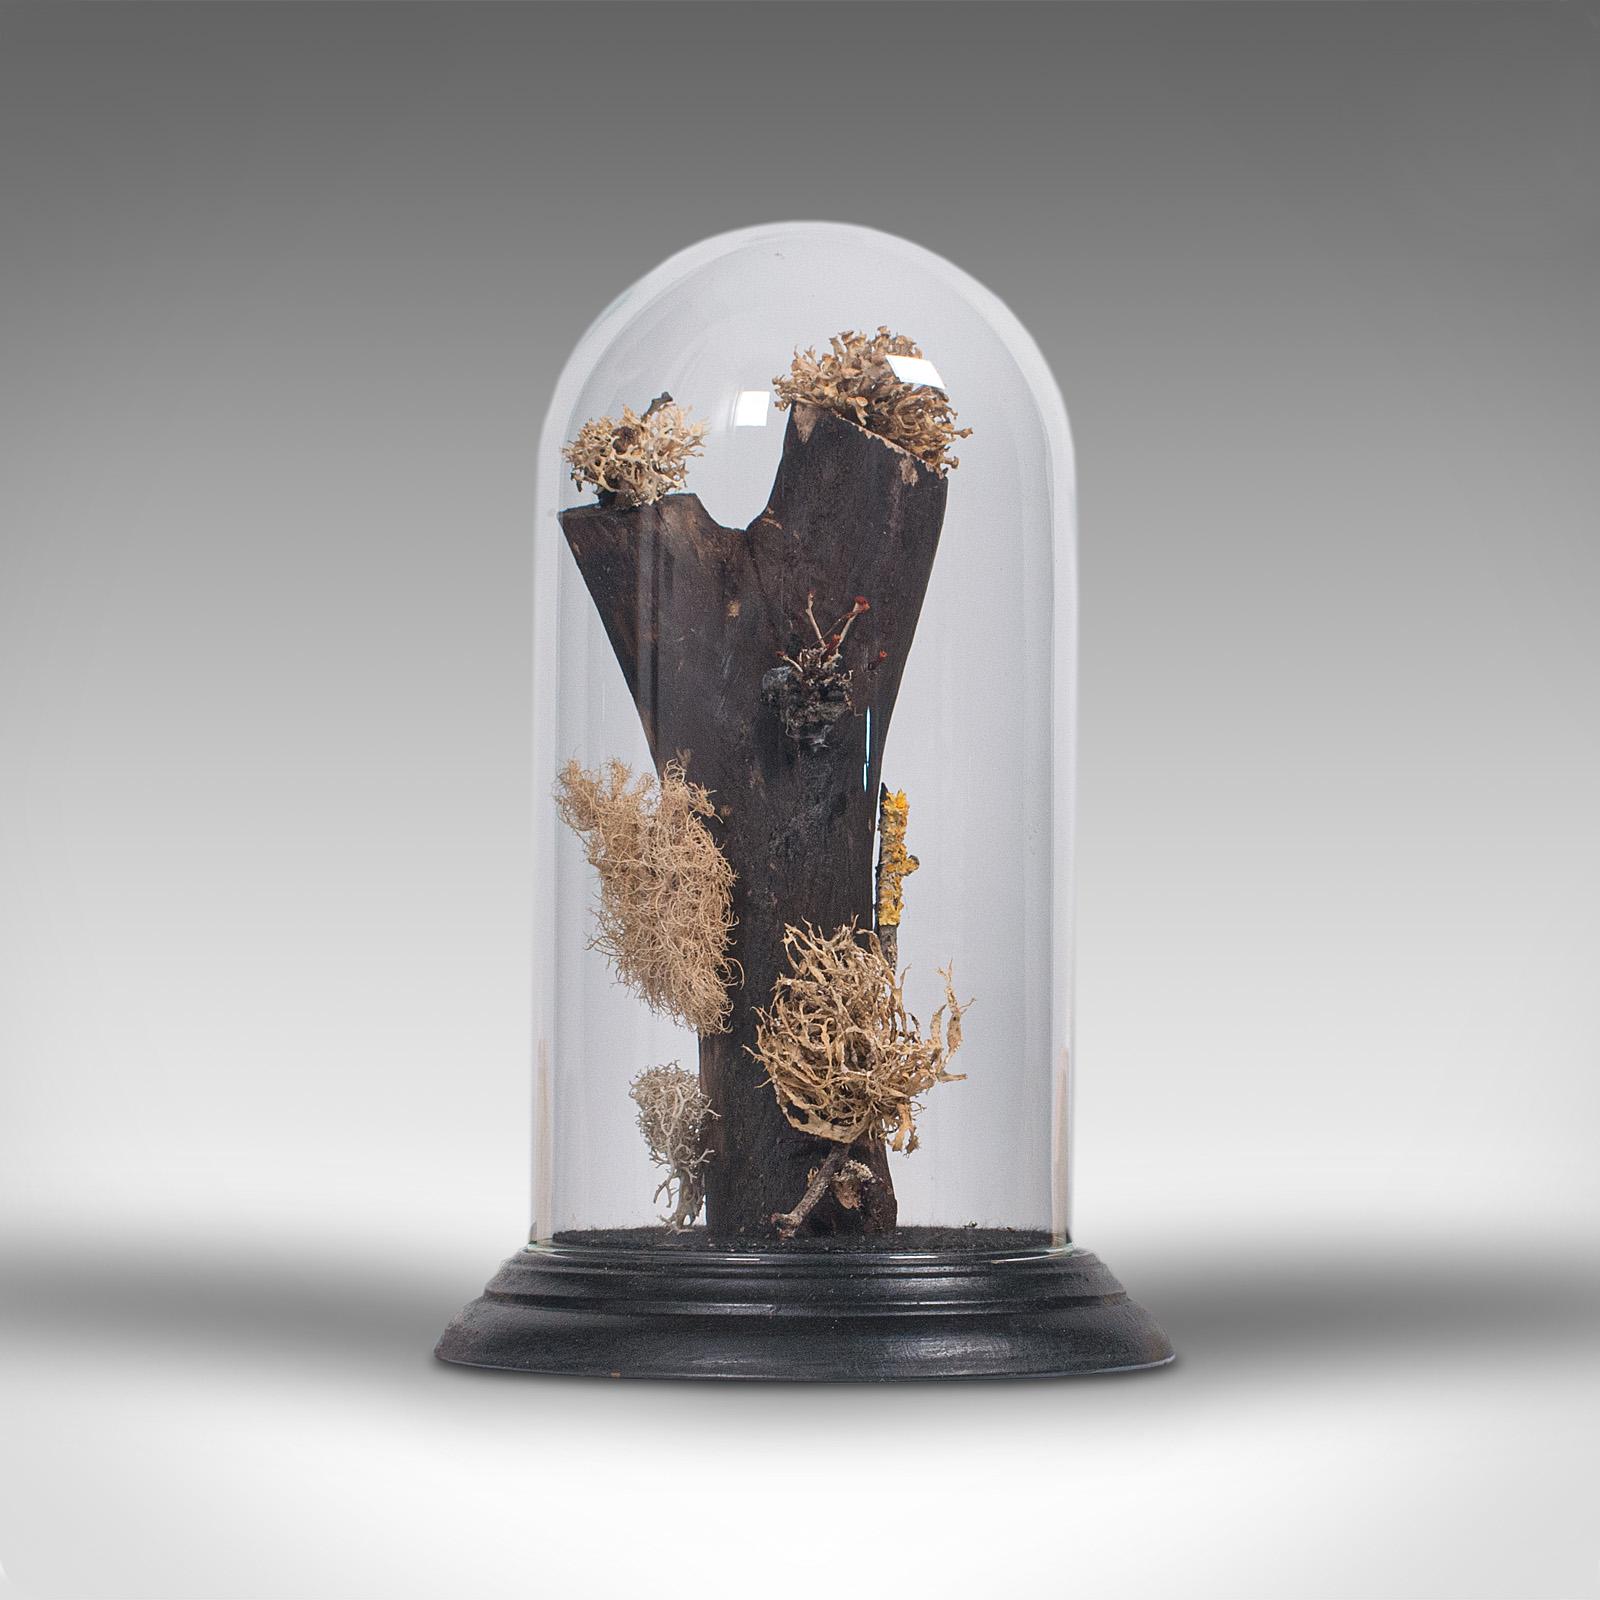 German Vintage Taxidermy Display Dome, Glass, Specimen, Moss, Lichen, Late 20th Century For Sale